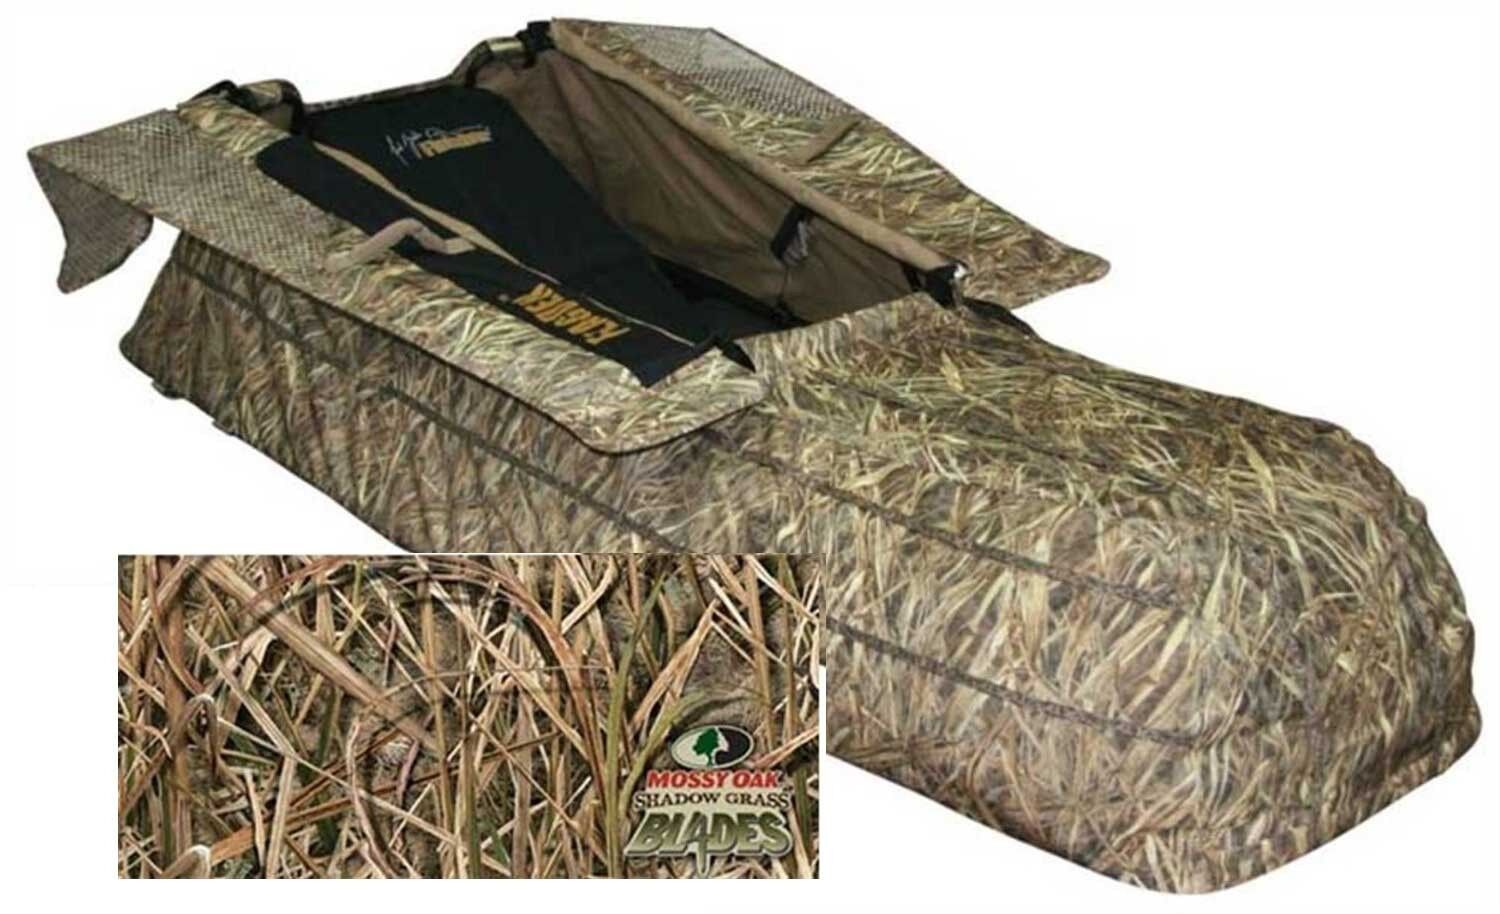 AVERY GHG FINISHER LAYOUT GROUND HUNTING BLIND SHADOW GRASS BLADES CAMO NEW